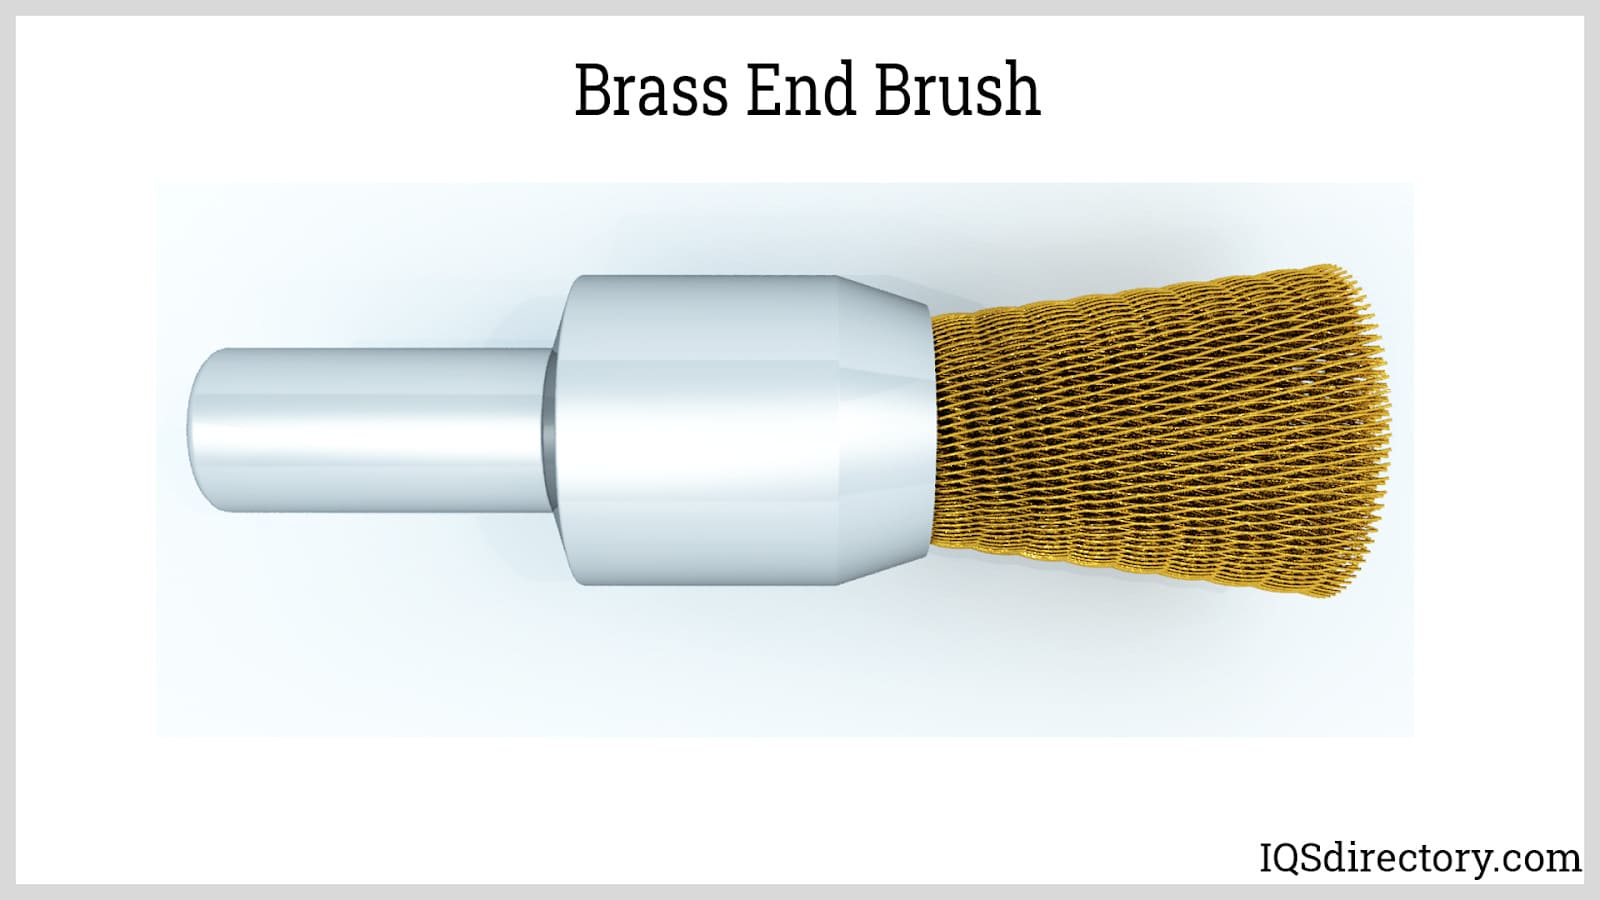 Brass vs Stainless Steel: Know the Difference before Making a Purchase